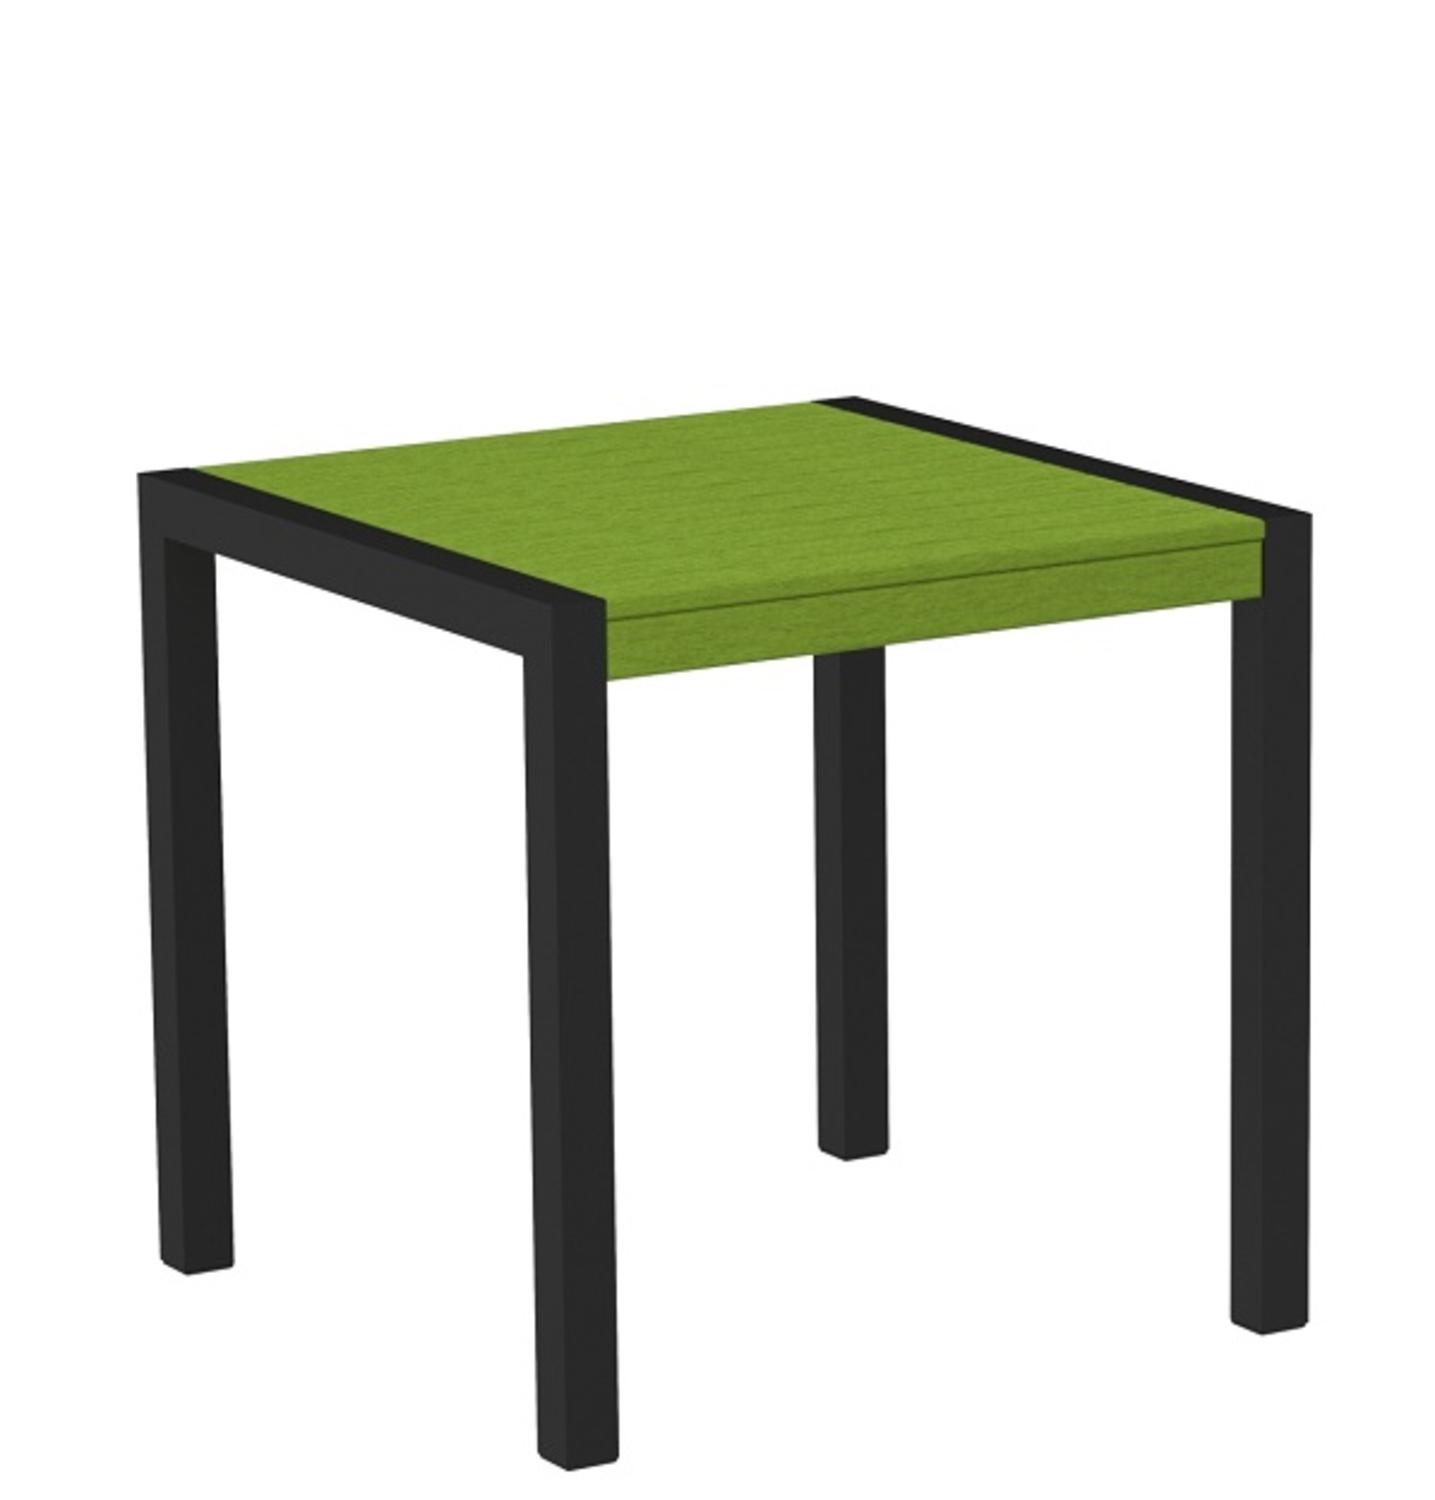 Eco-Friendly Furnishings  30" Recycled Earth-Friendly Outdoor Bistro Table - Lime Green with Black Frame